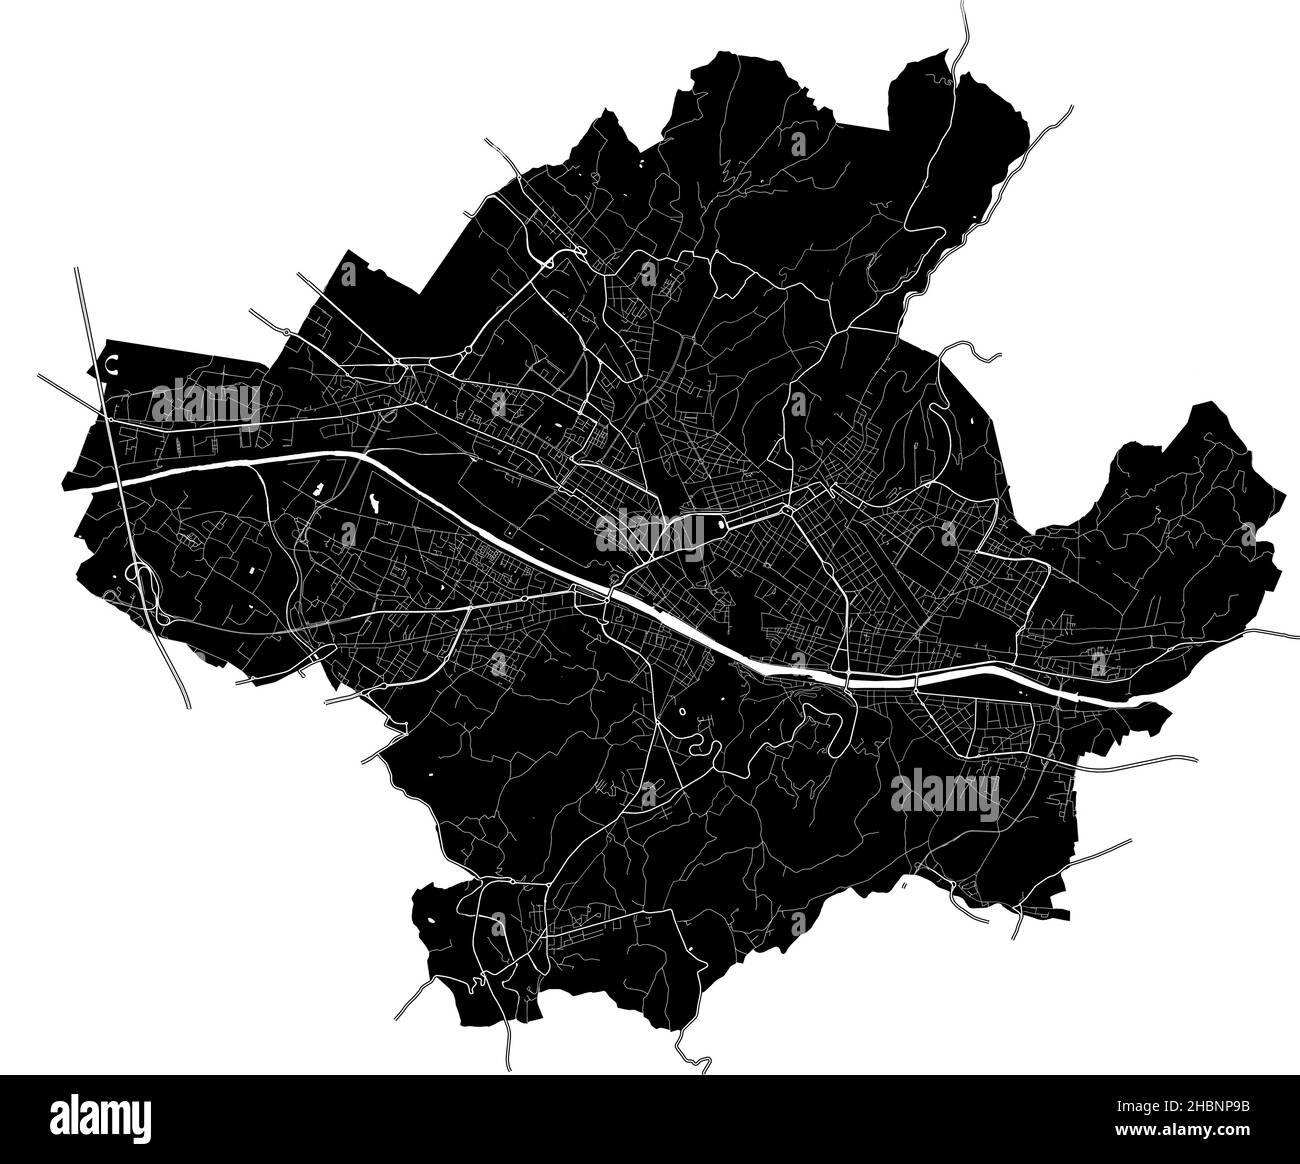 Florence, Italy, high resolution vector map with city boundaries, and editable paths. The city map was drawn with white areas and lines for main roads Stock Vector